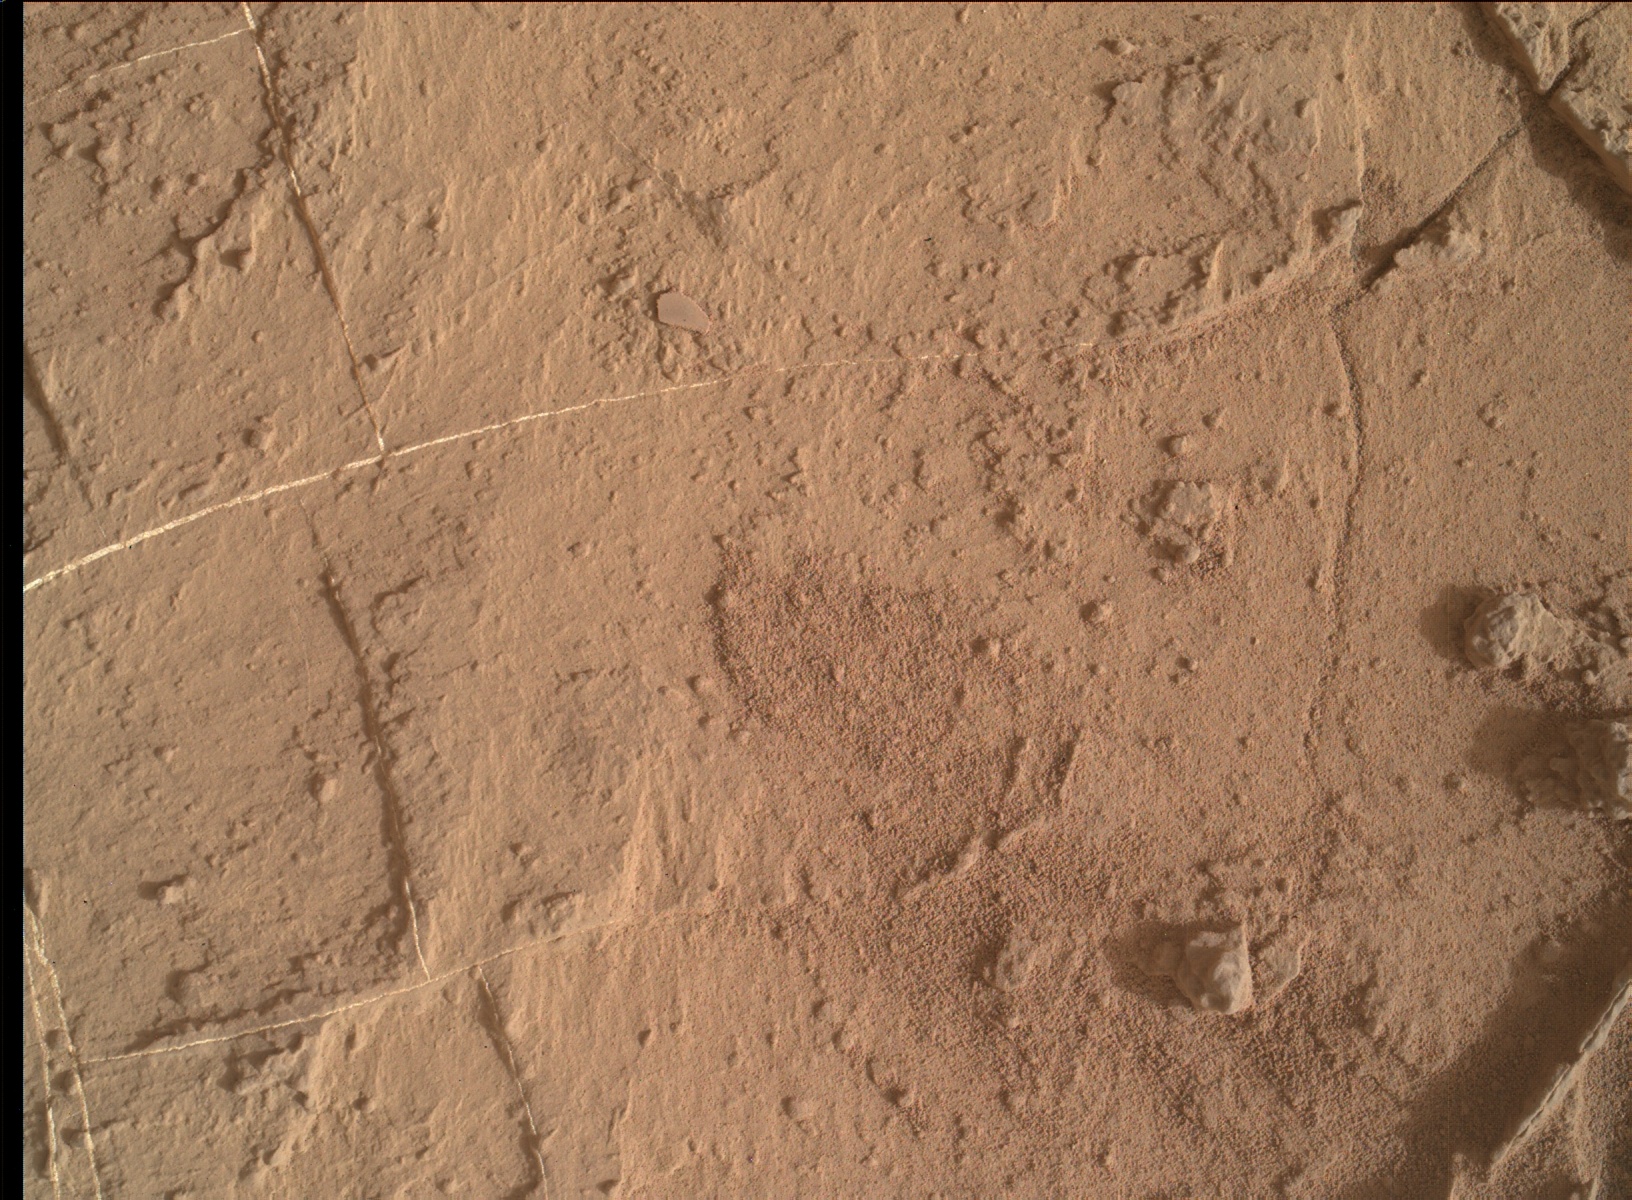 Nasa's Mars rover Curiosity acquired this image using its Mars Hand Lens Imager (MAHLI) on Sol 1497